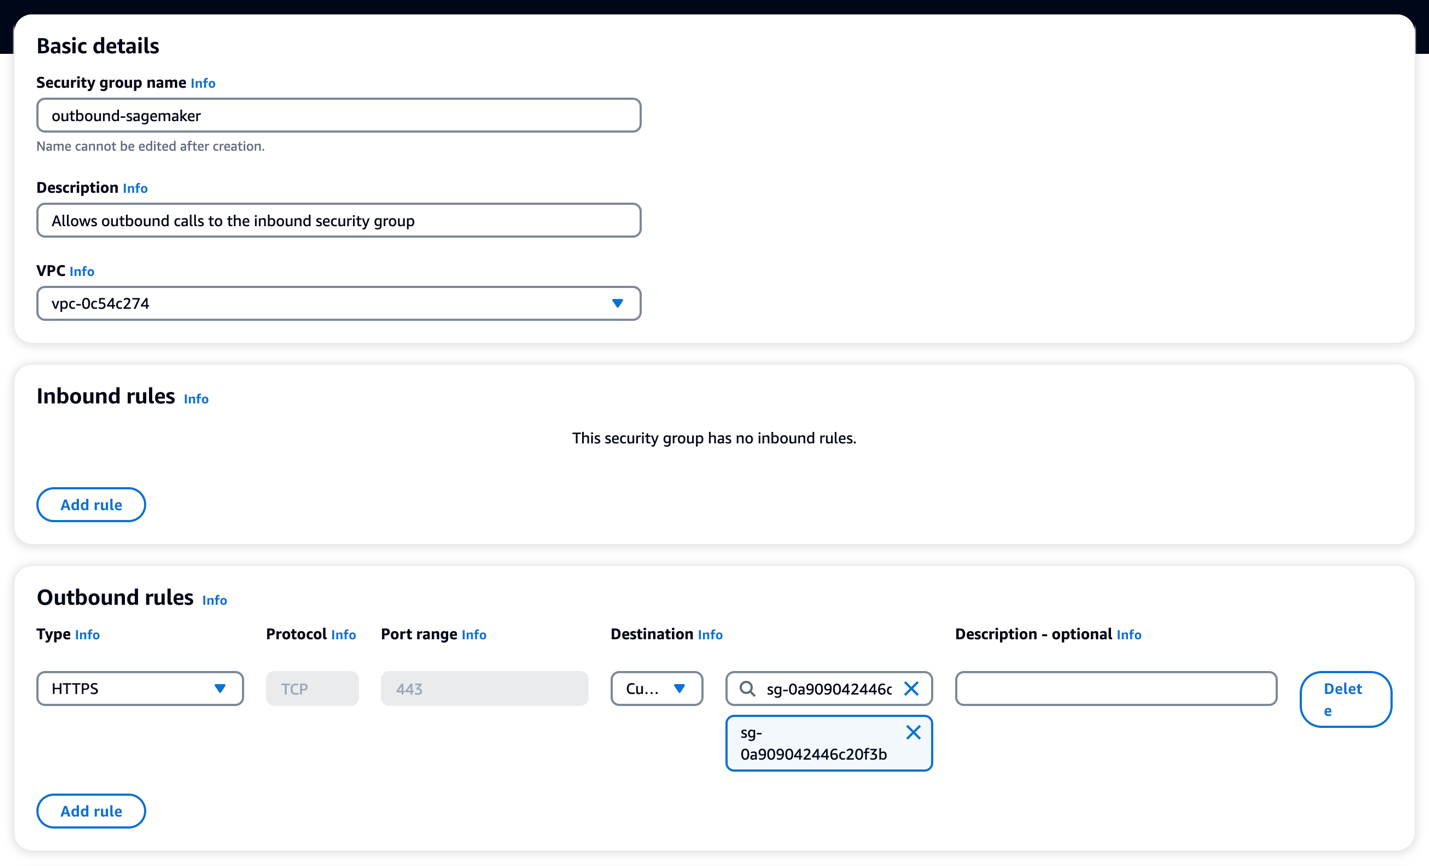 configure the security group to connect to AWS services using AWS PrivateLink